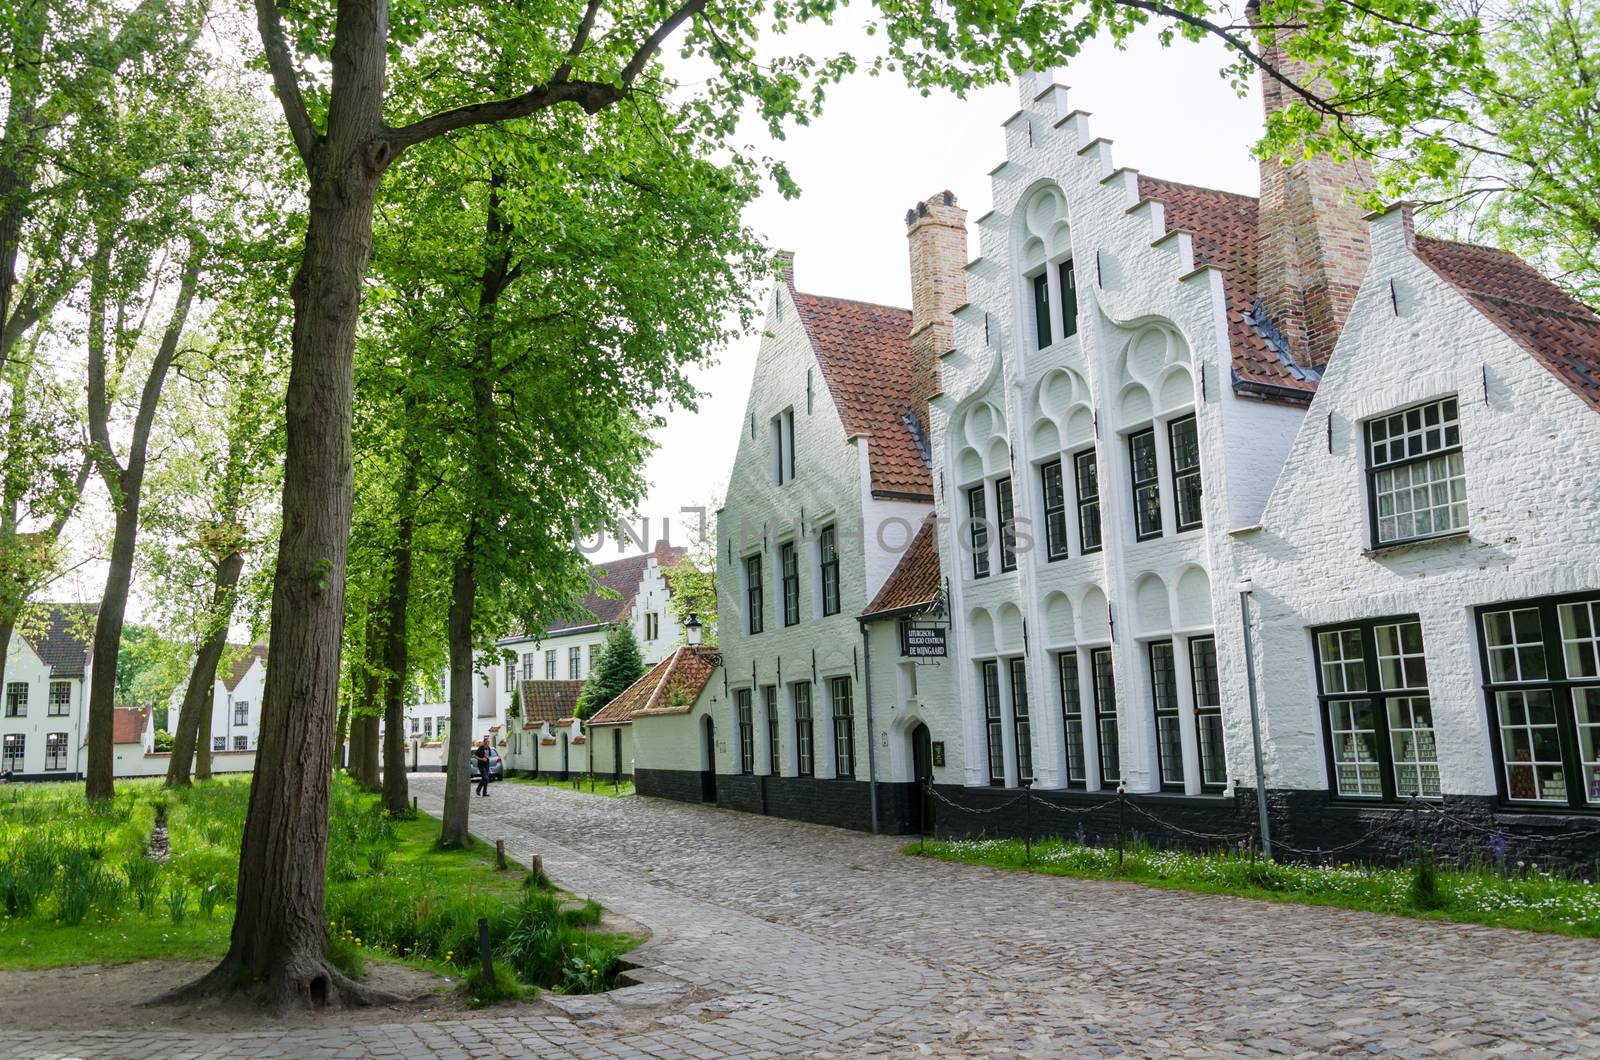 Bruges, Belgium - May 11, 2015: People visit White houses in the Beguinage in Bruges by siraanamwong